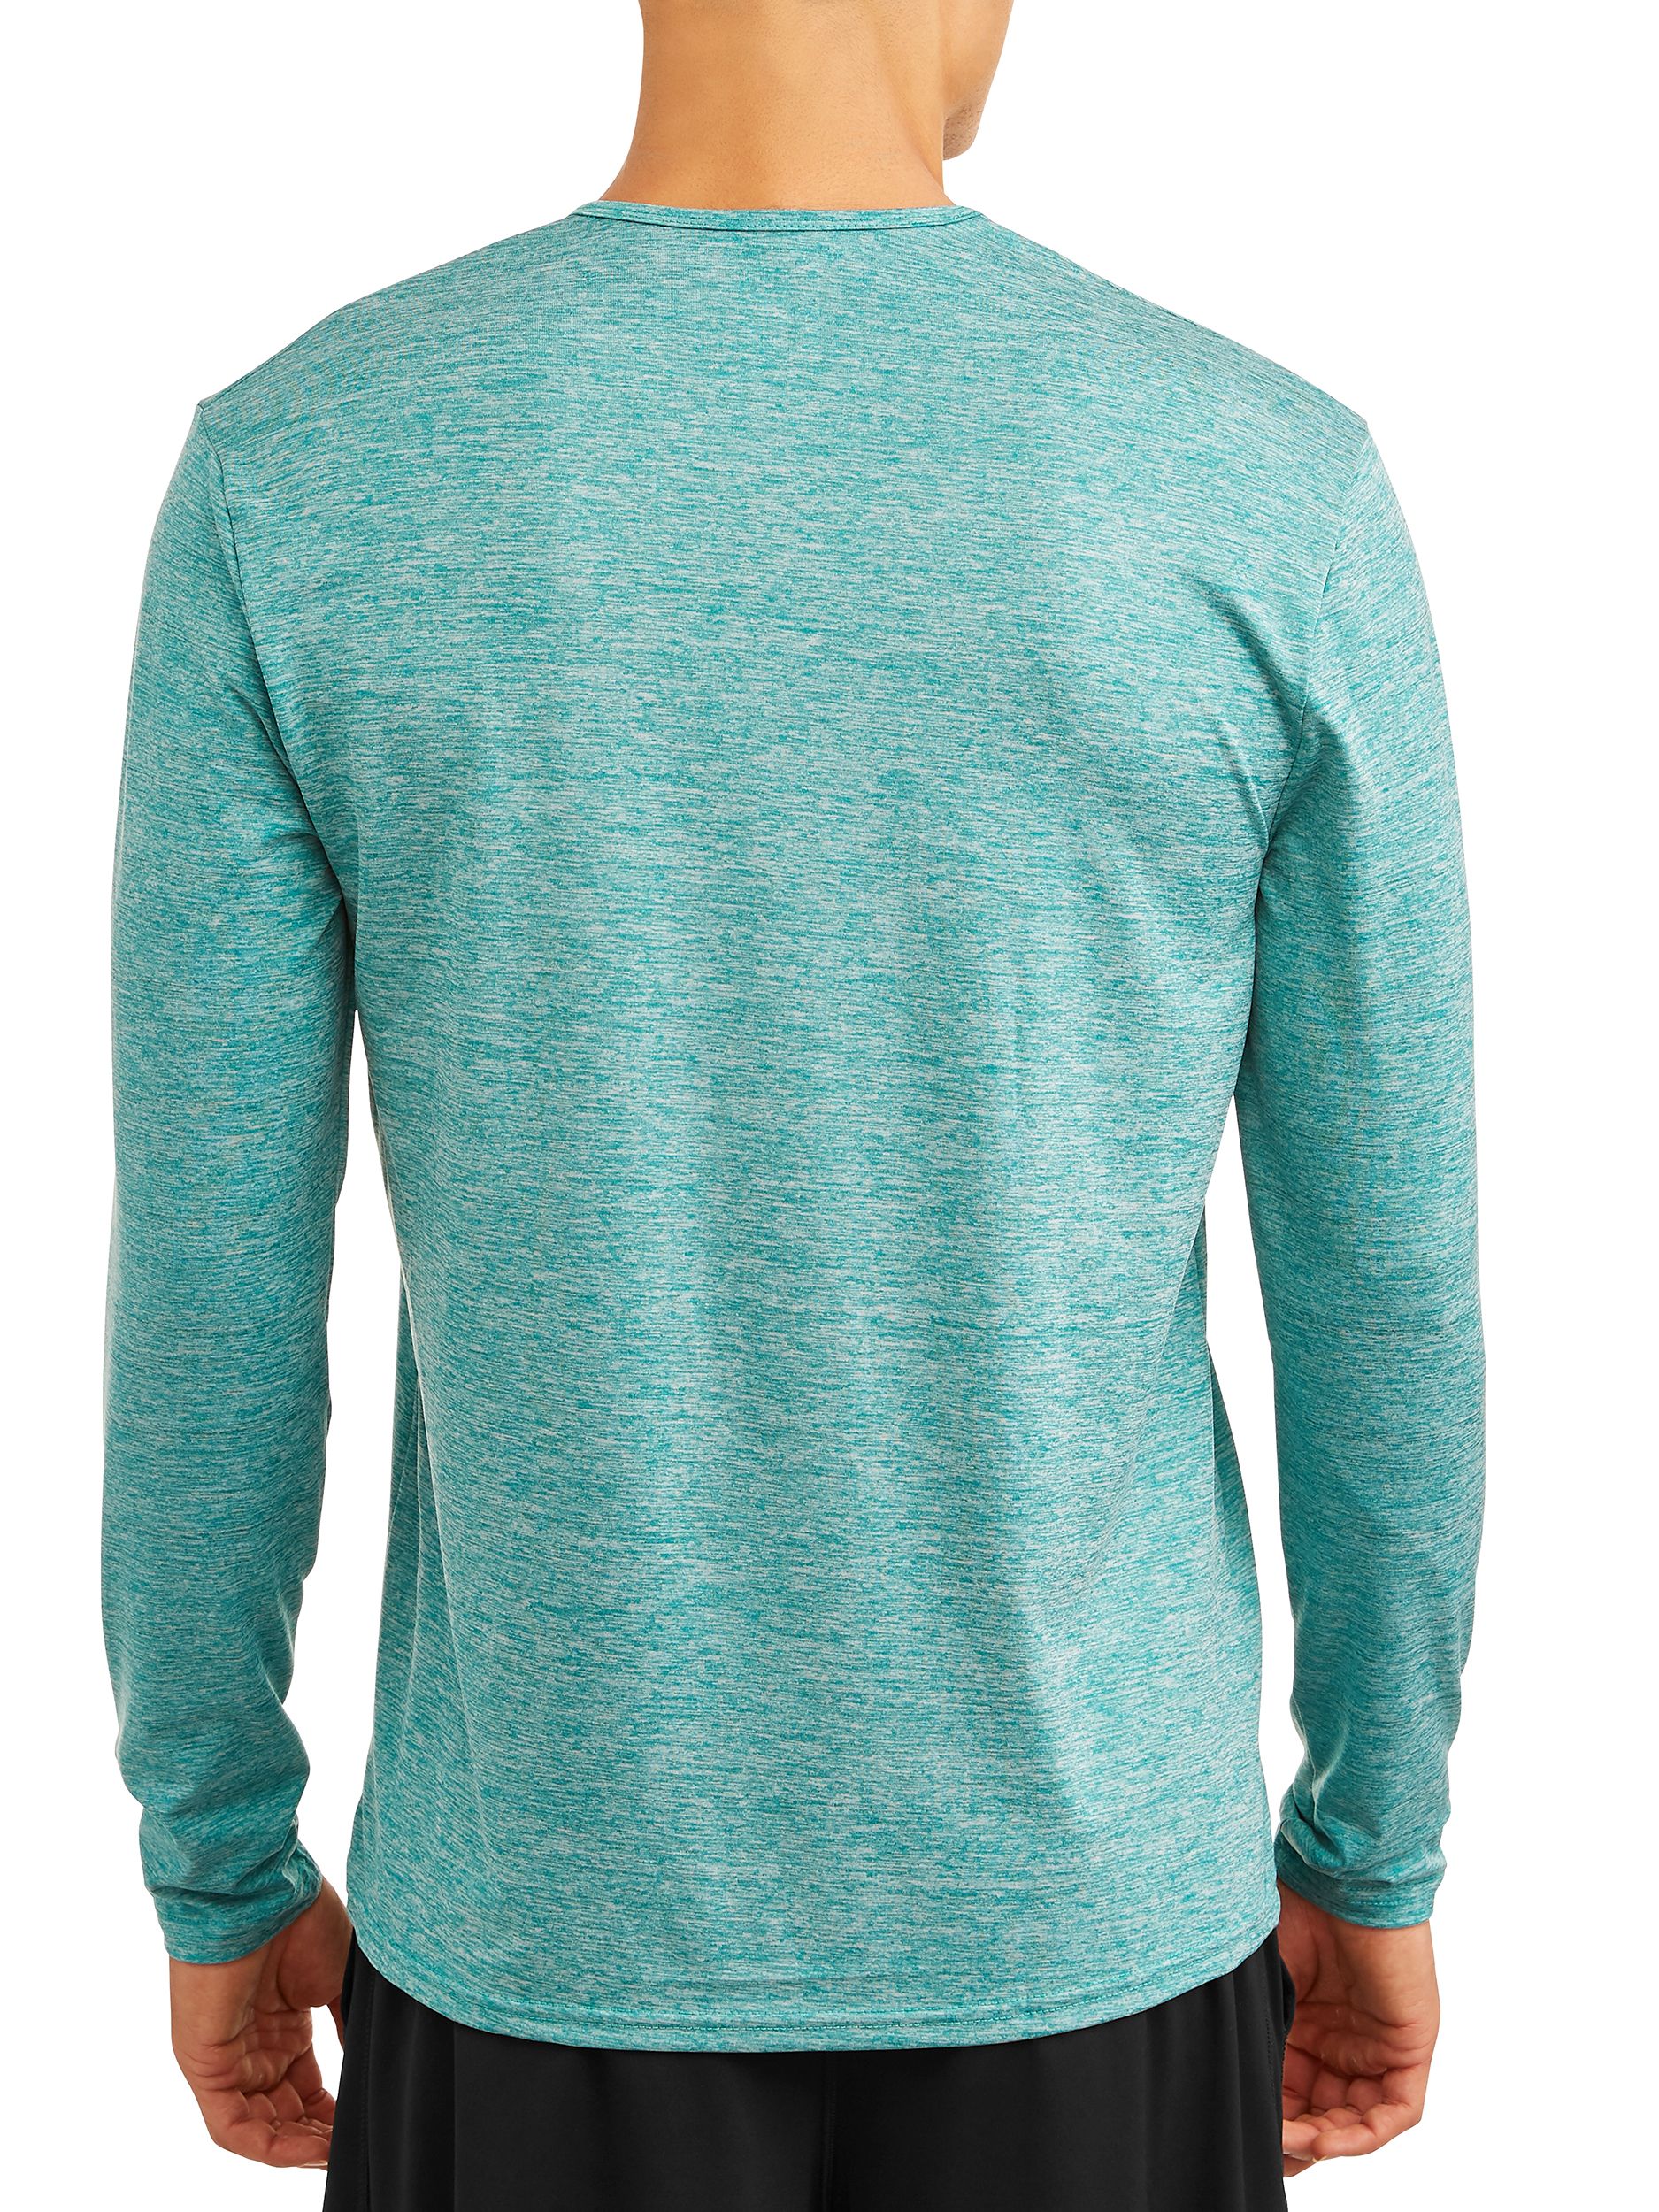 Blue Star Clothing Men's Base Layer Performance Heathered Long Sleeve Crew Neck Fitness T-Shirt - 2 Pack - image 4 of 4